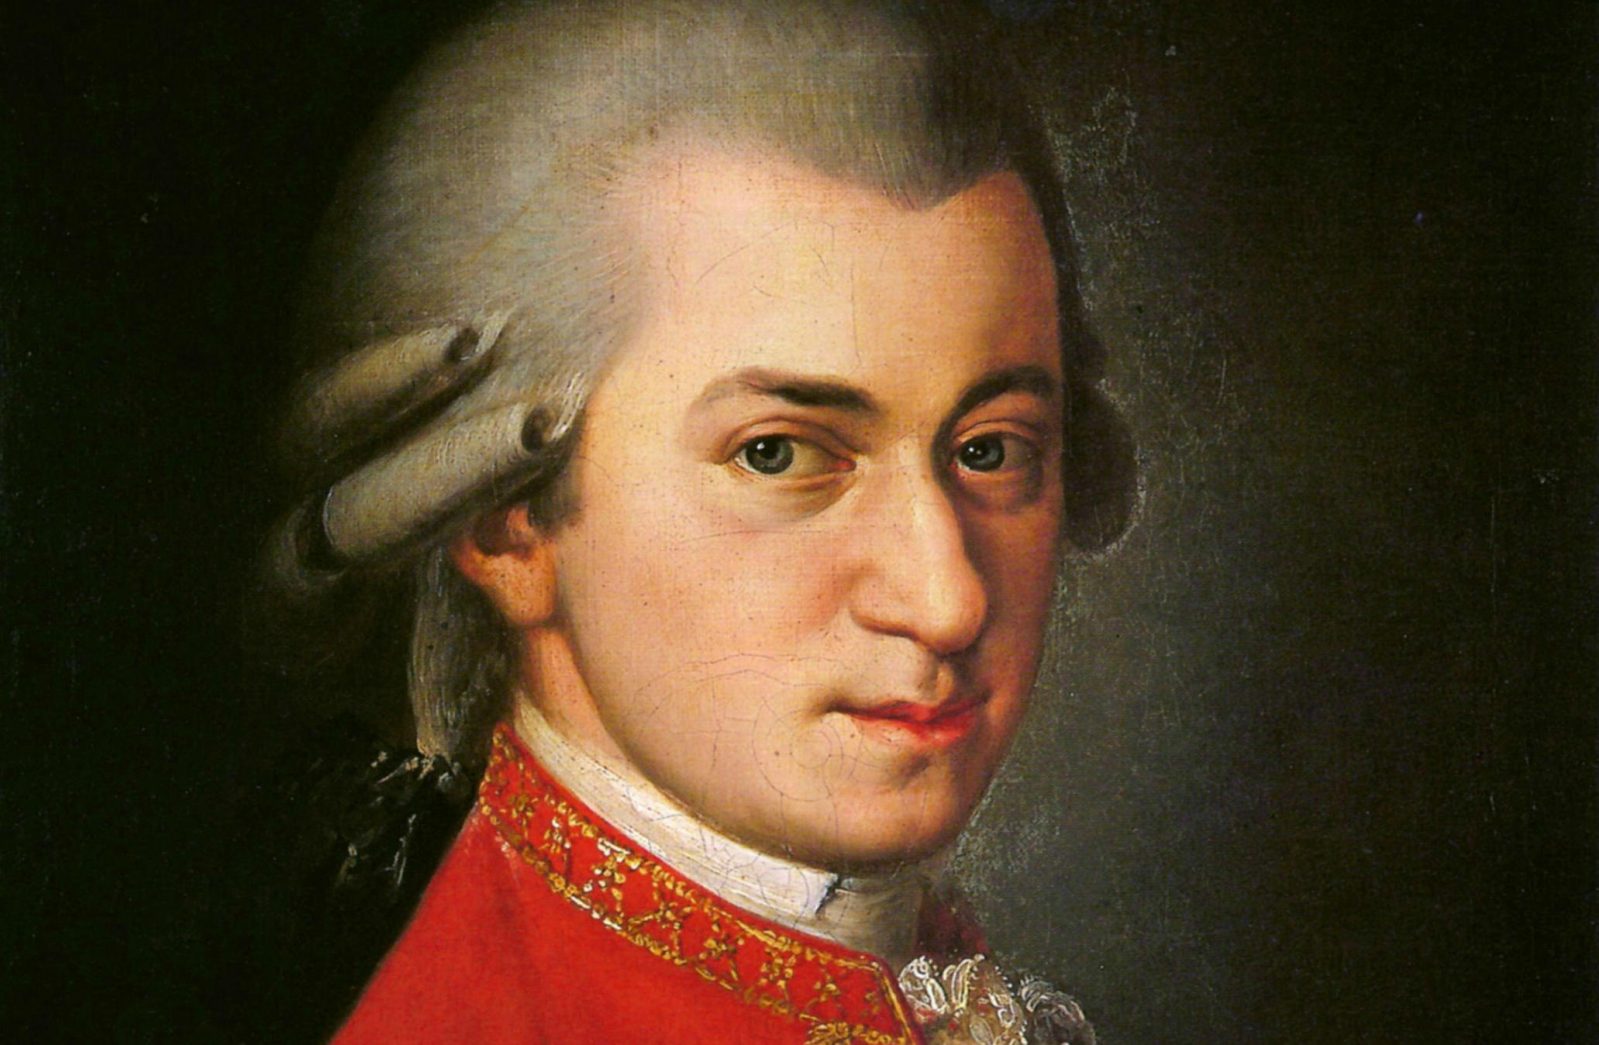 Can You Pass This Basic Middle School History Test? Wolfgang Amadeus Mozart